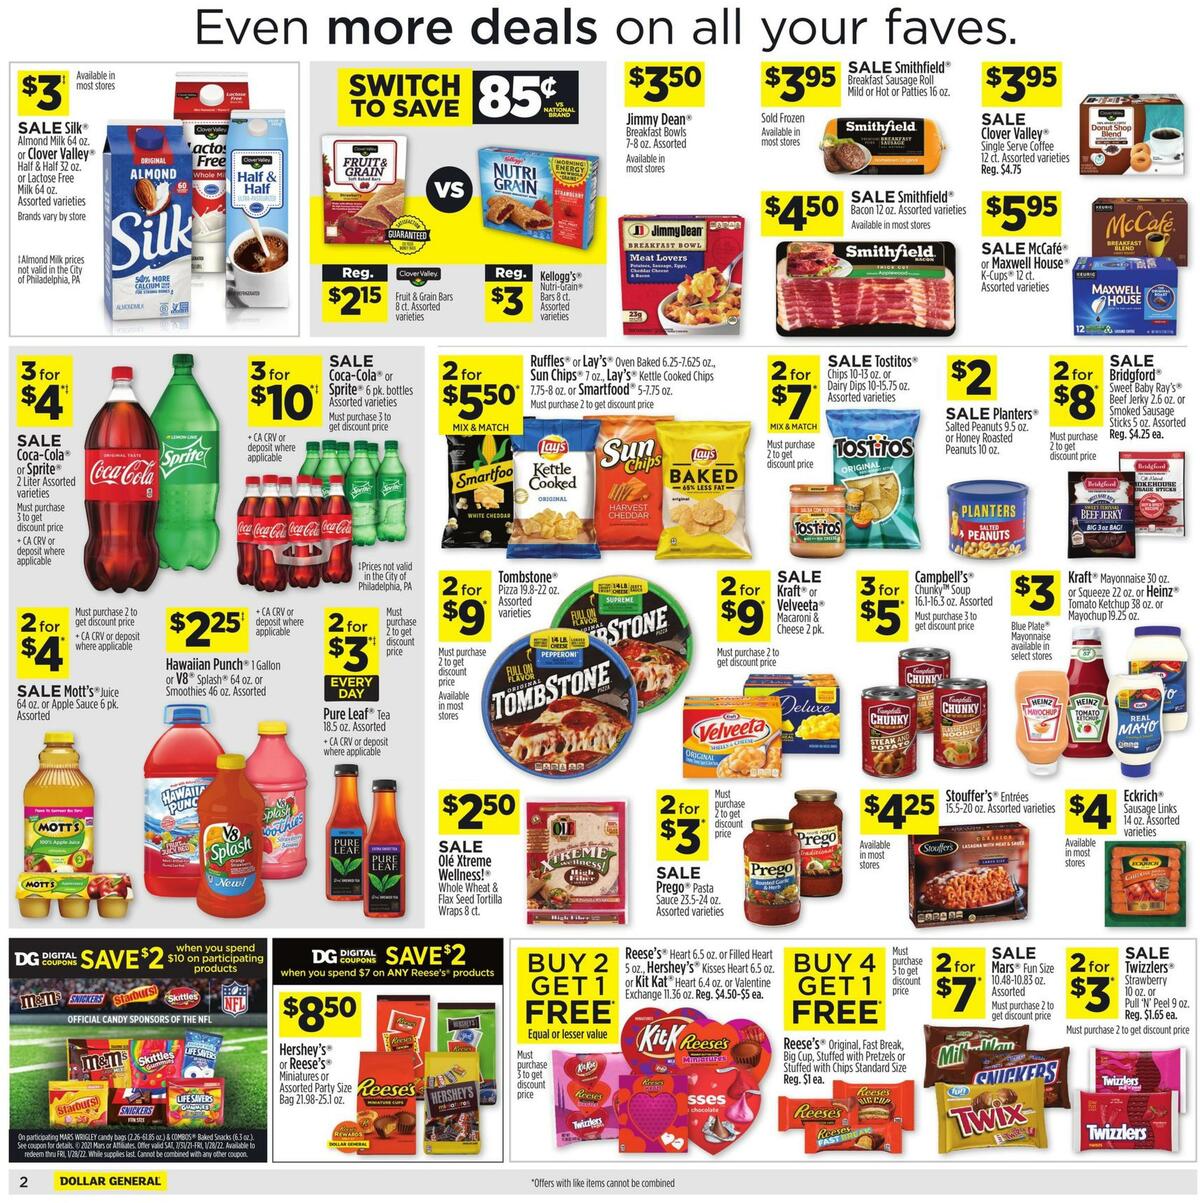 Dollar General Weekly Ad from January 2